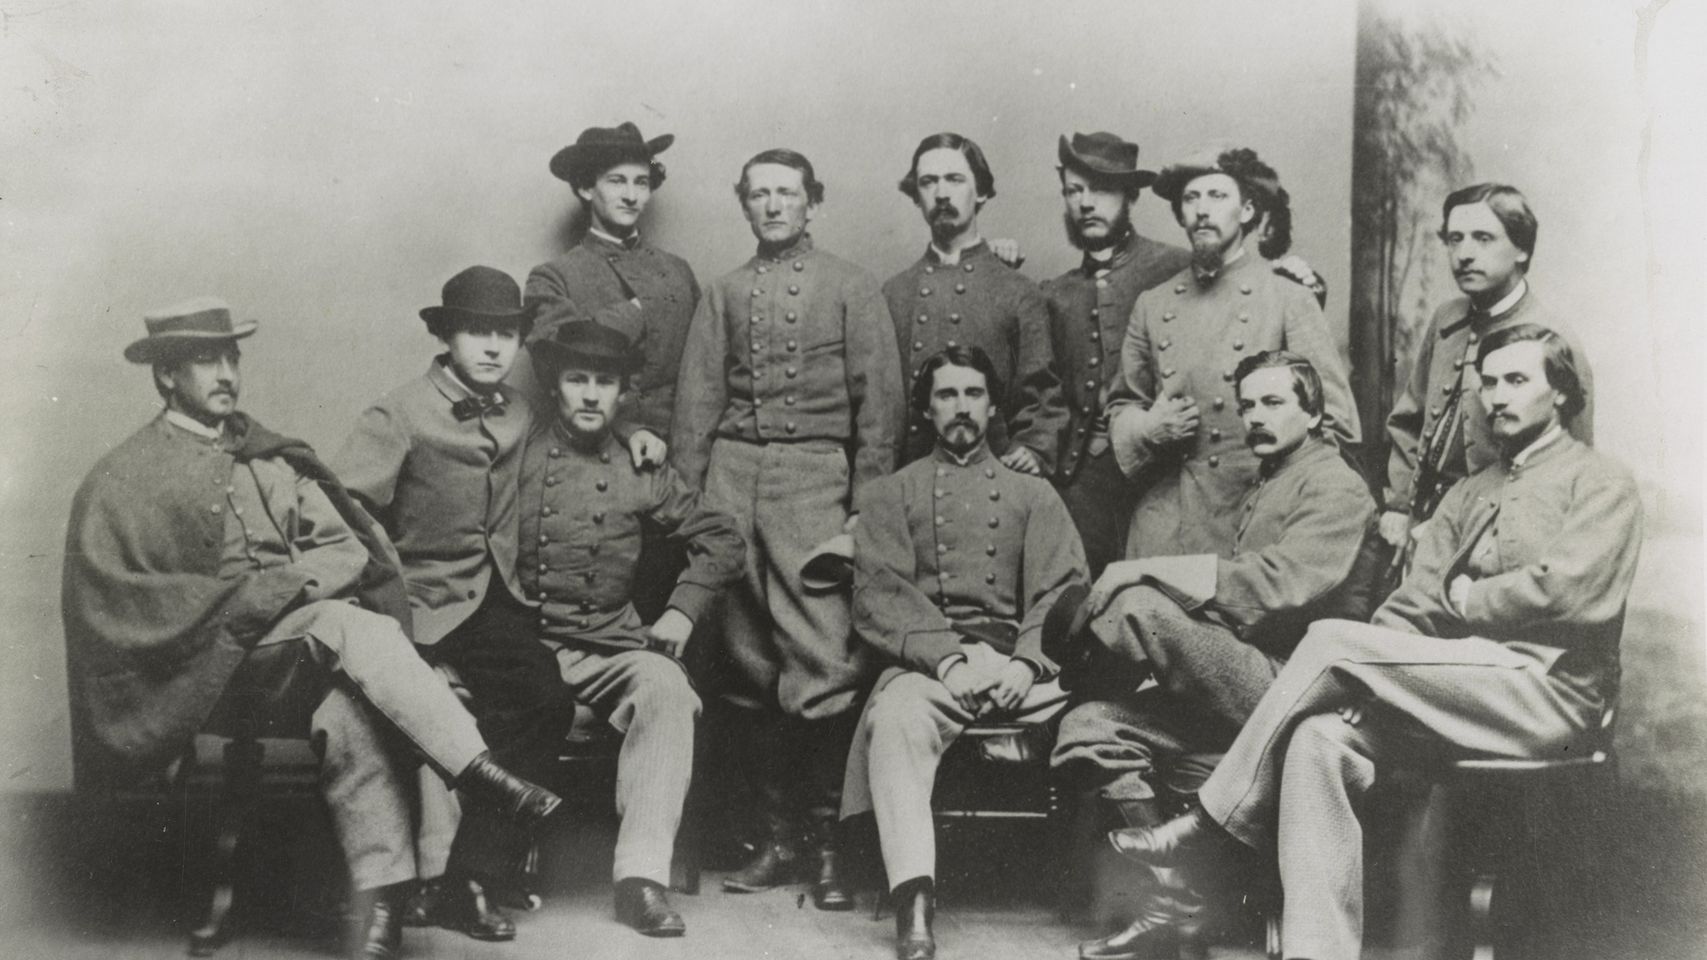 “a Few Of My Favorite Stories,” The Men Of Mosby's Rangers, An Afternoon With Eric Buckland